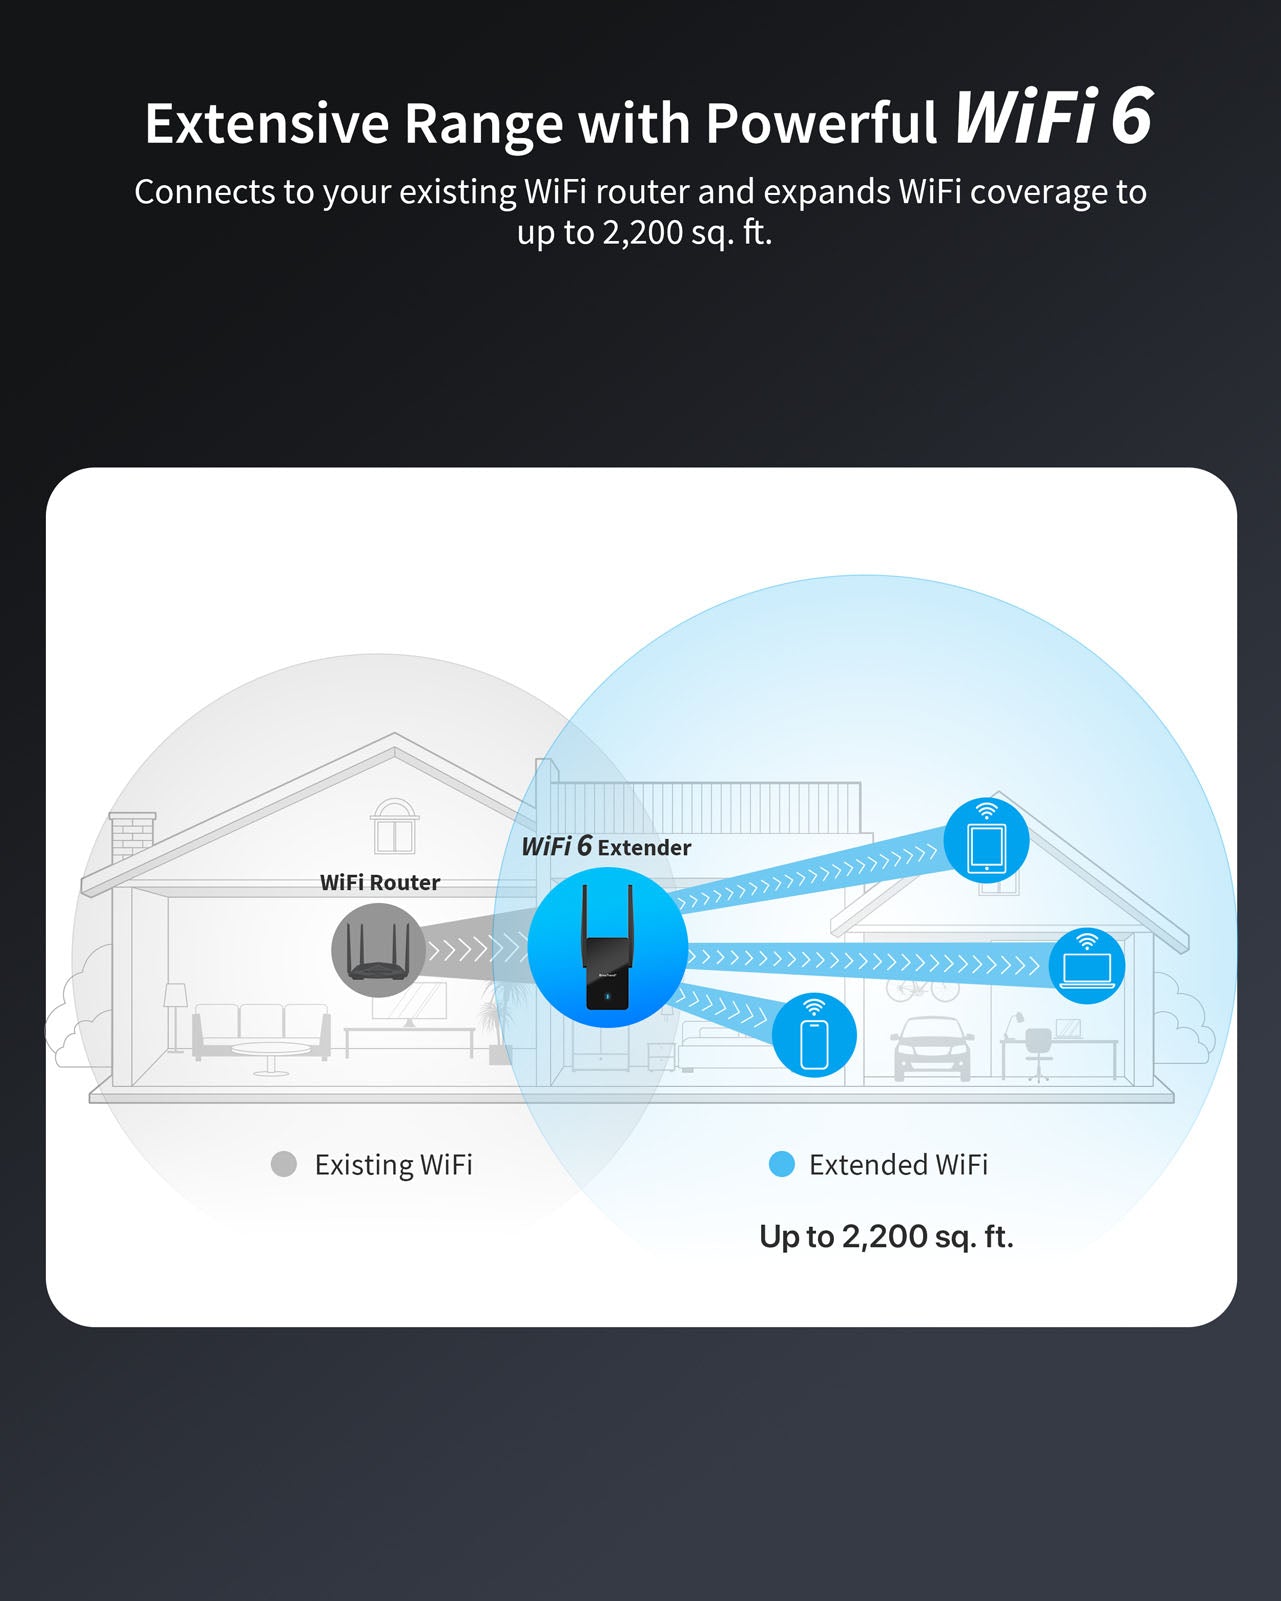 AX3000 WiFi 6 Extender Connects to Your Existing WiFi Router Wirelessly and Extends WiFi Coverage to Up to 2200 Square Feet Compatible with Any WiFi Router or Gateway